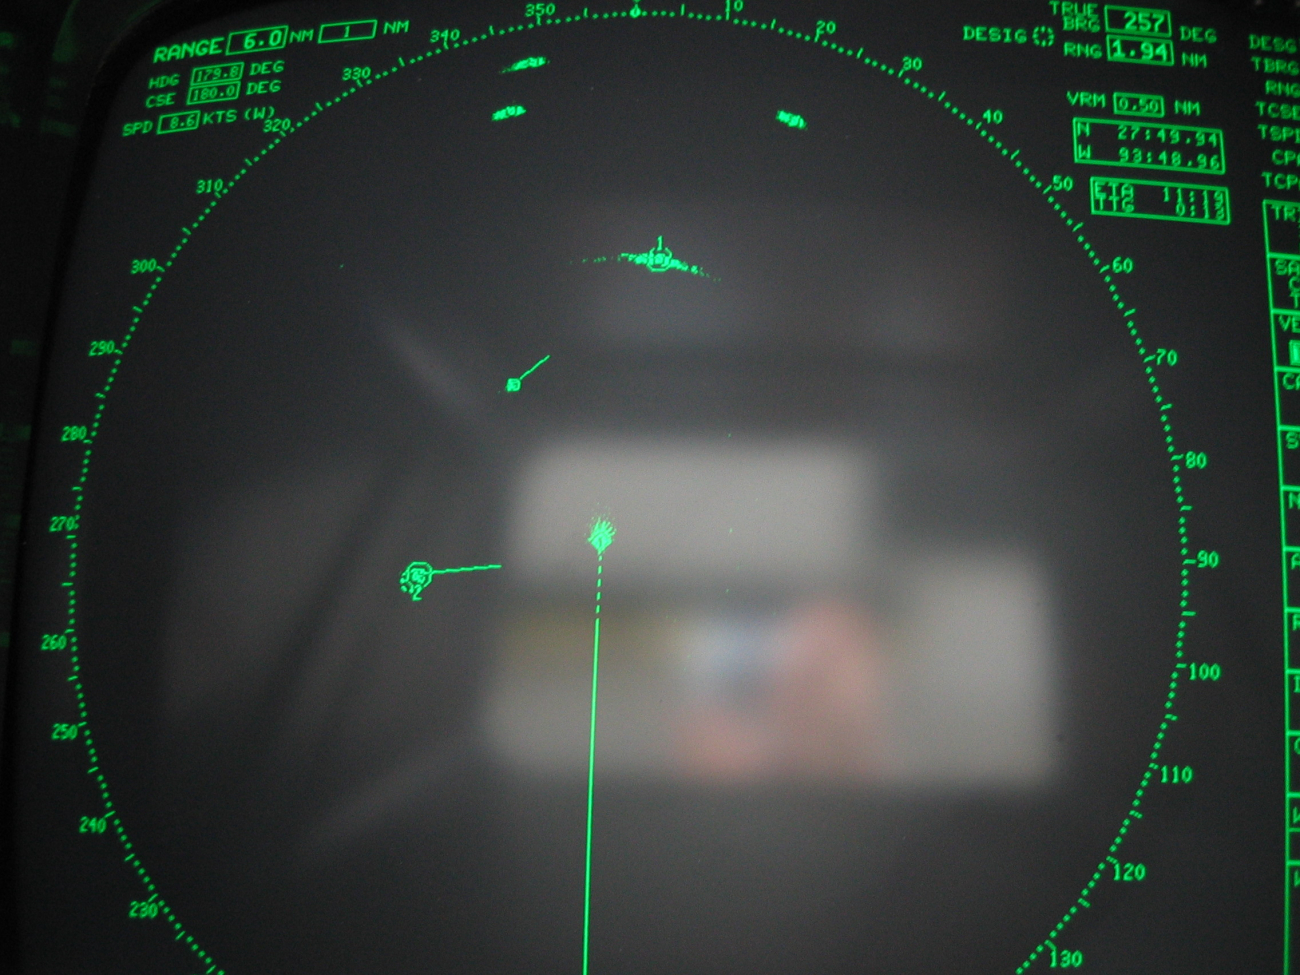 Radar display with a variety of targets